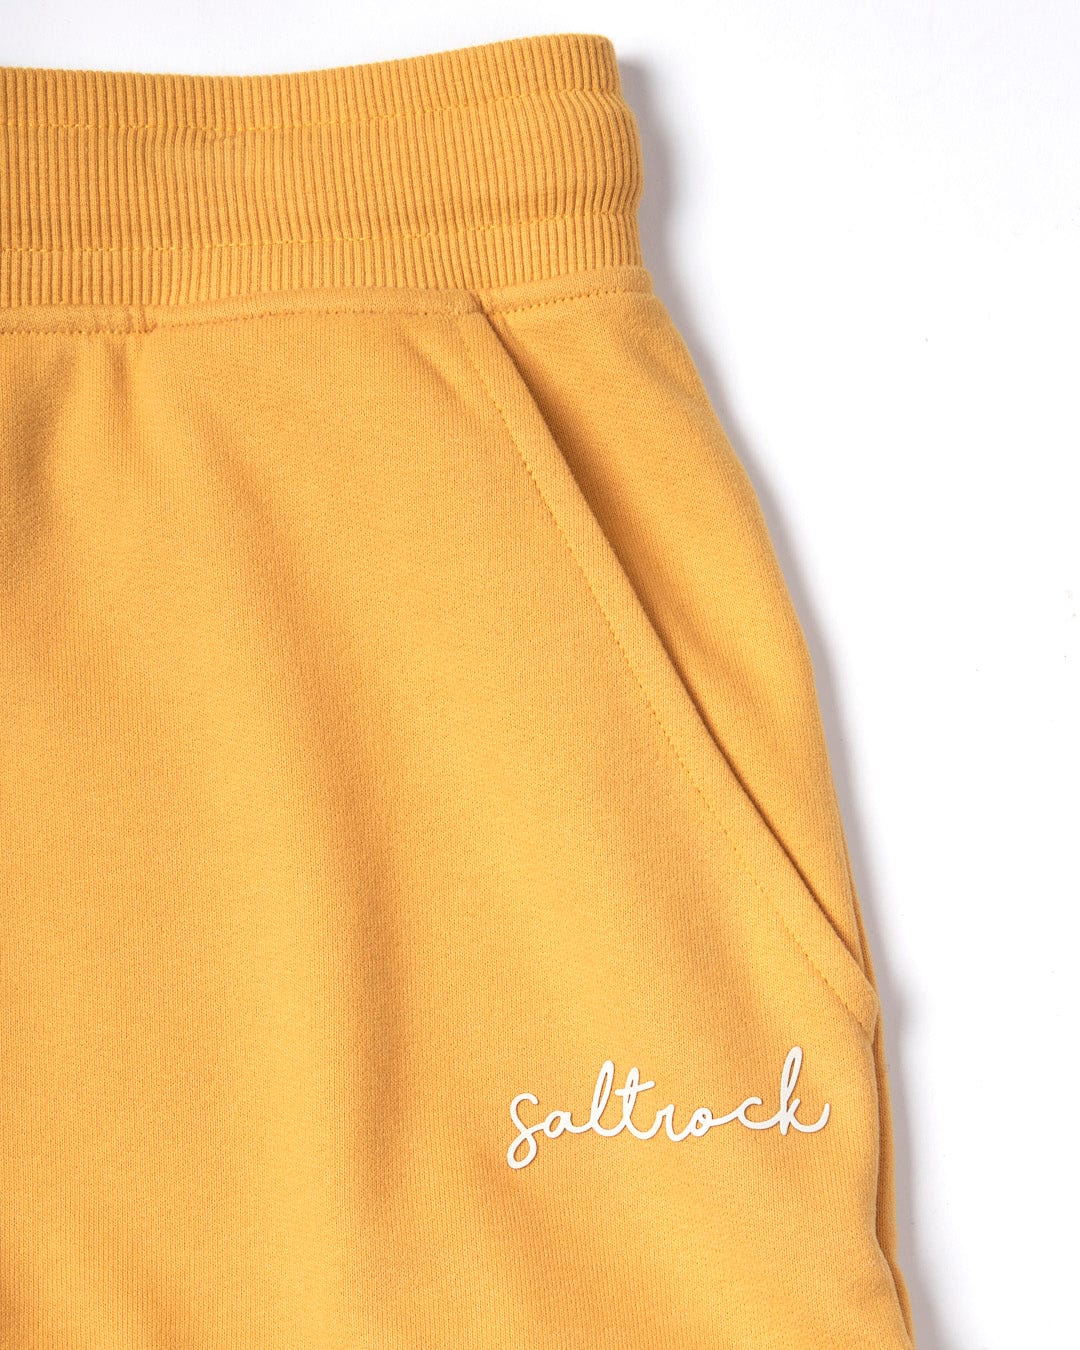 Close-up of Saltrock Velator - Womens Short - Yellow sweatpants with an elasticated waist and "Saltrock" embroidered near the pocket on a white background.